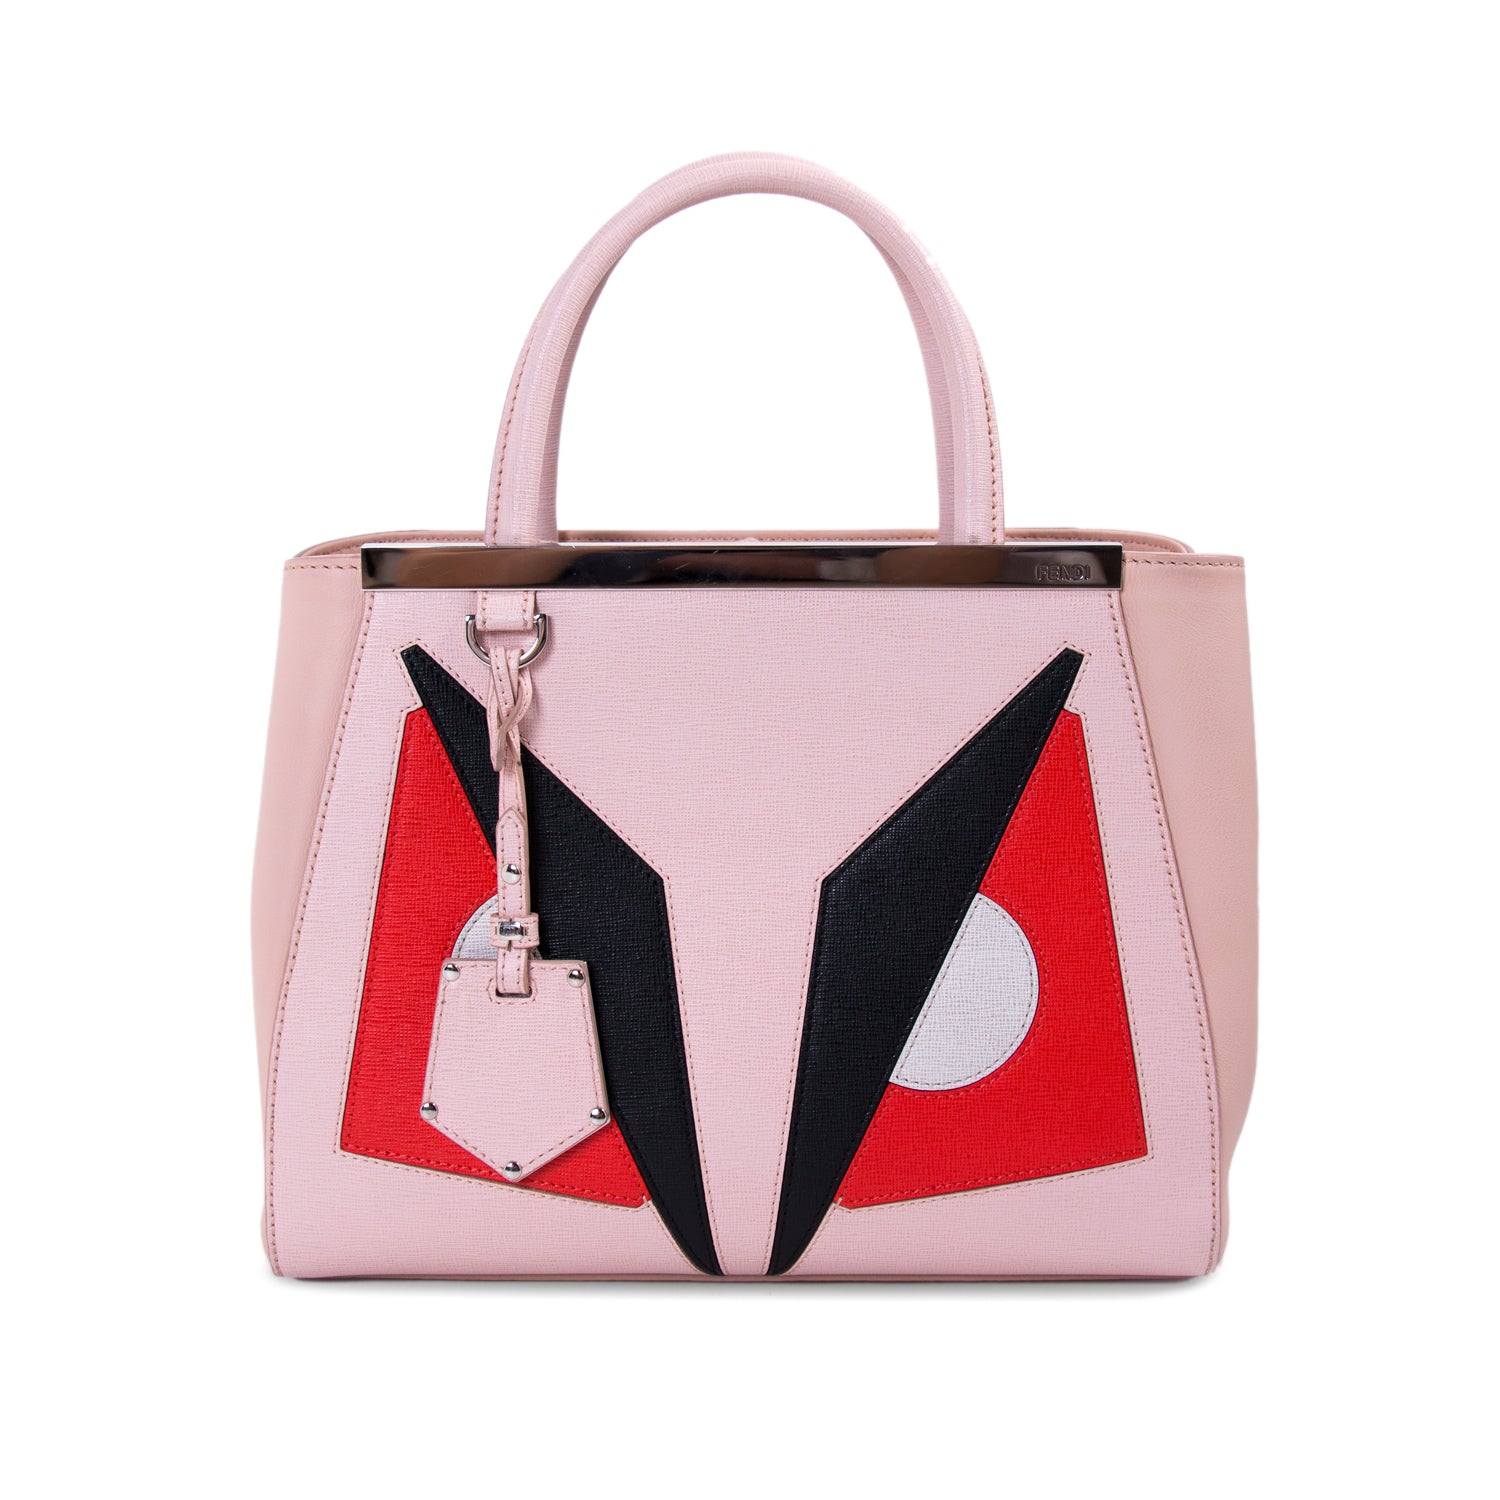 Shop authentic Fendi Petite 2Jours Monster Tote Bag at revogue for just ...